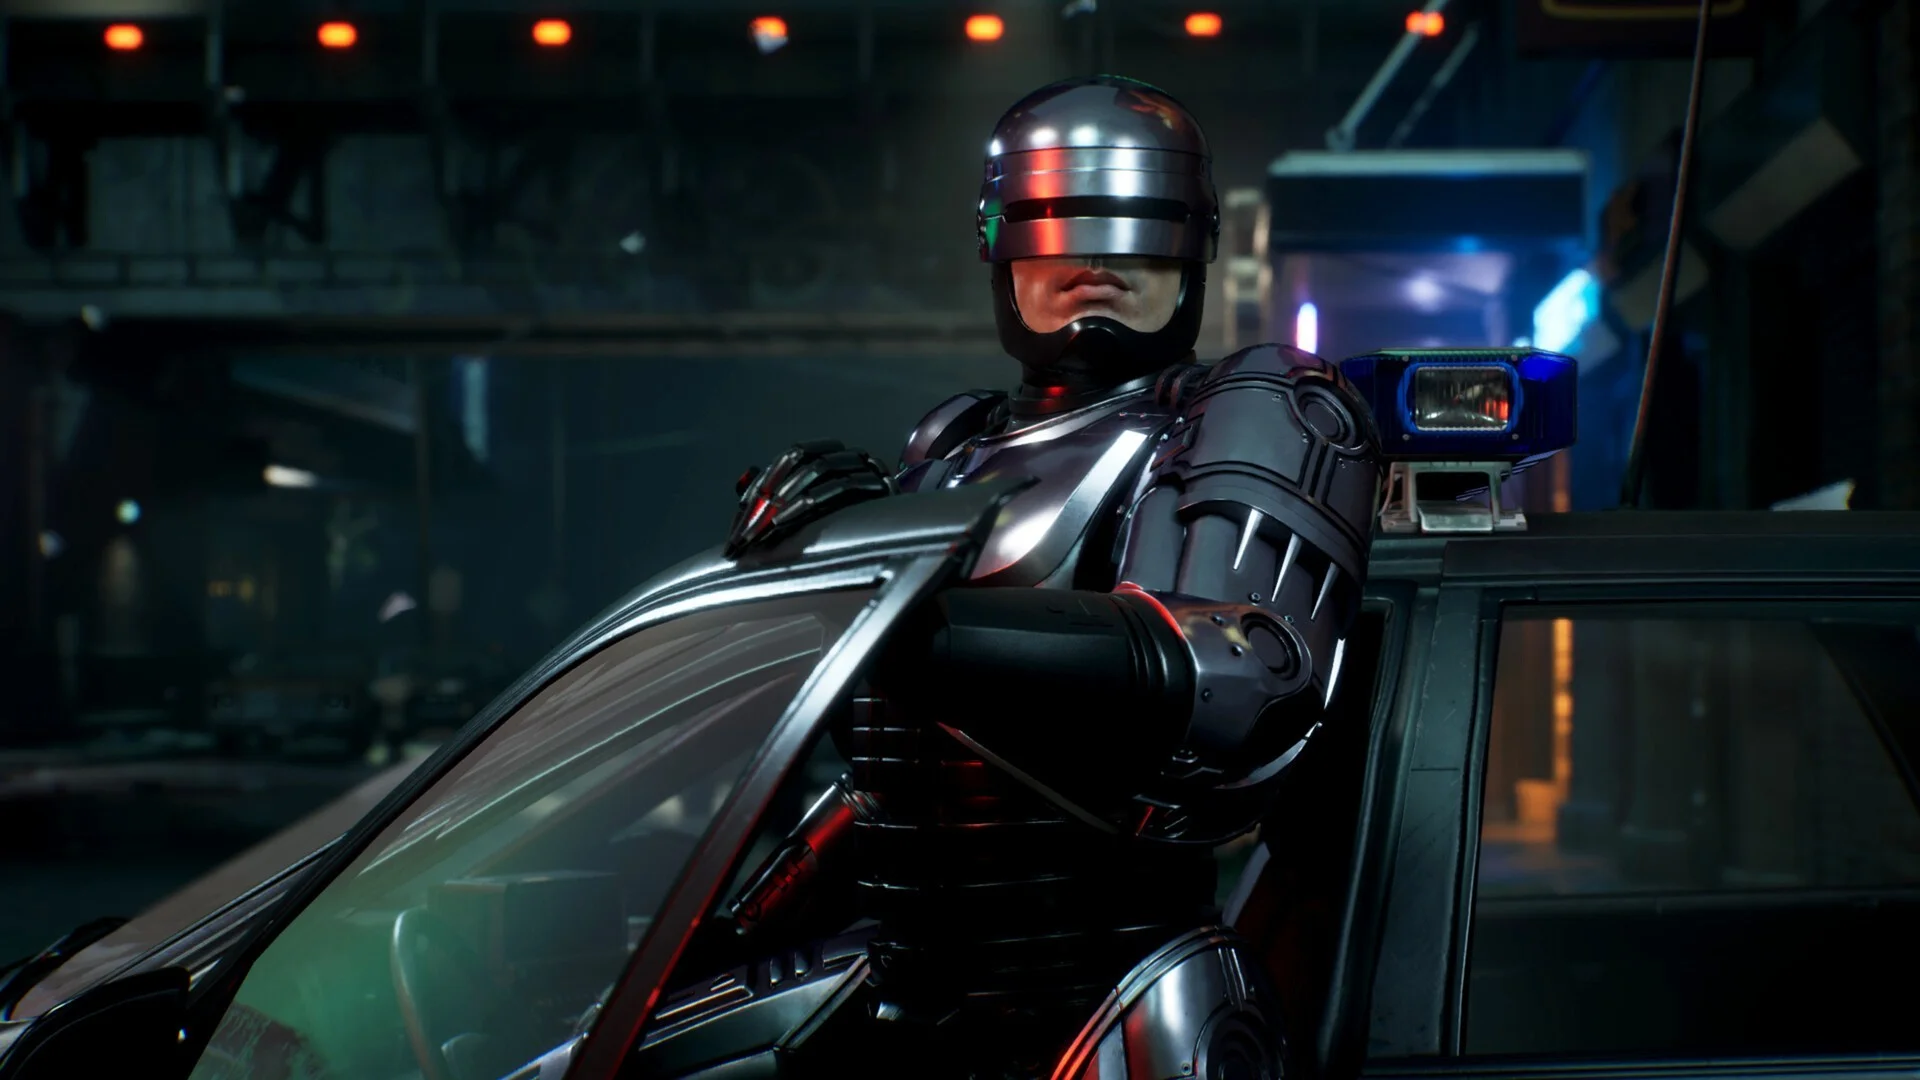 The creators of RoboCop: Rogue City are working on a new game